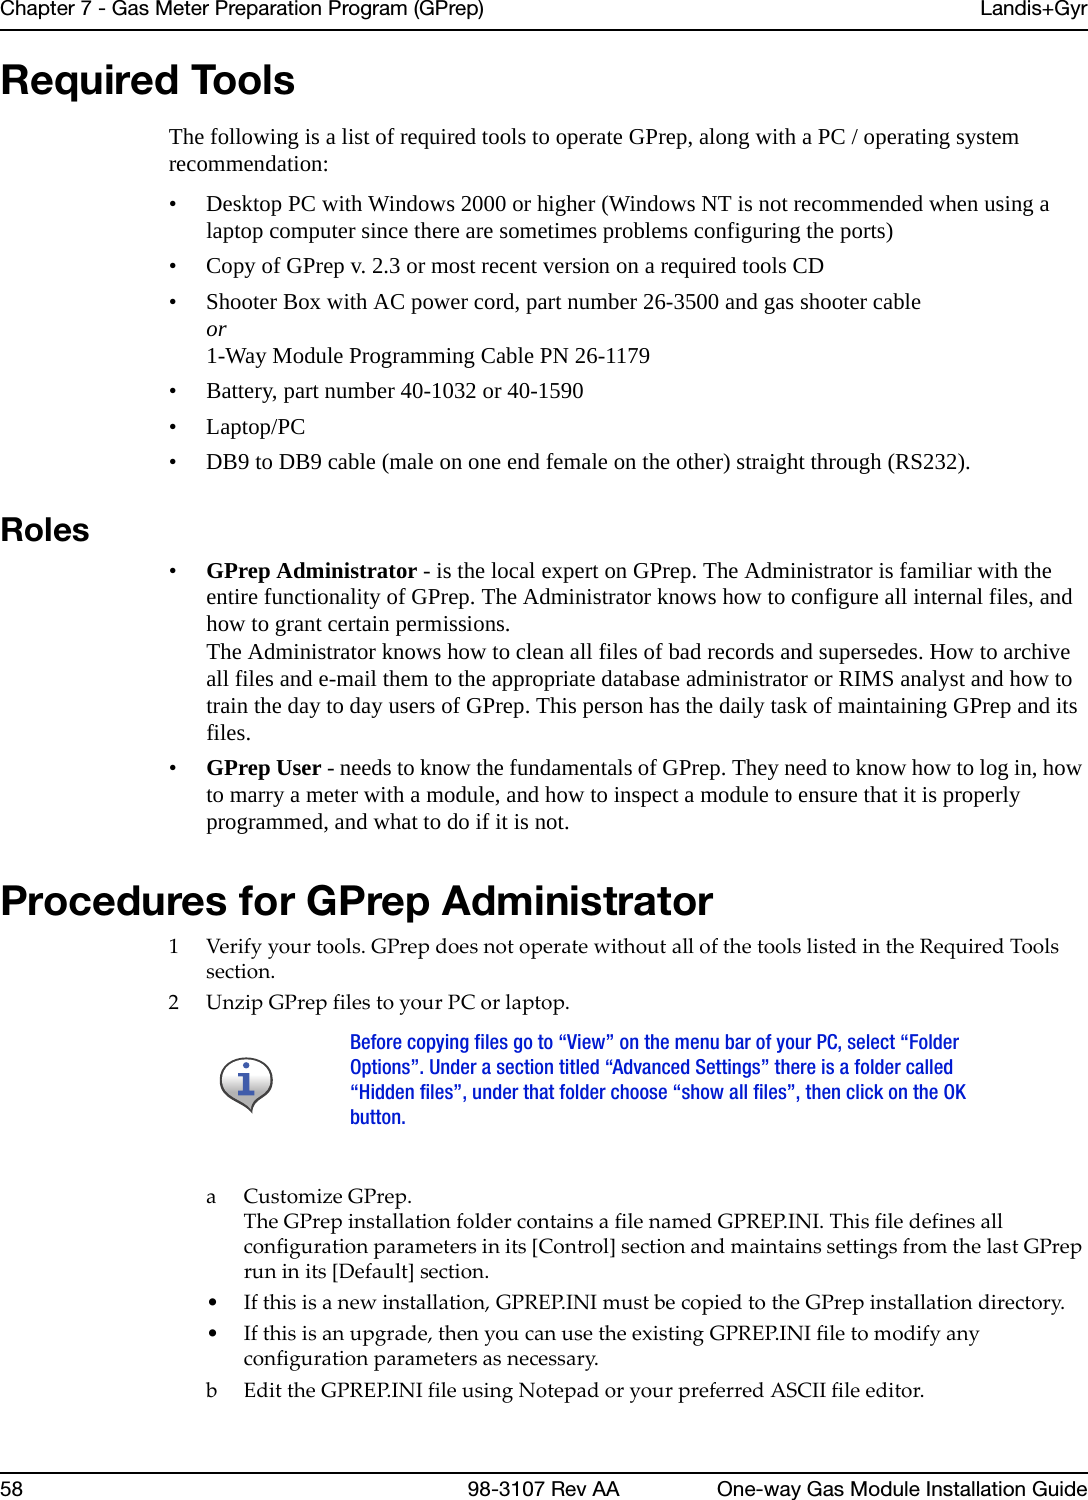 Chapter 7 - Gas Meter Preparation Program (GPrep) Landis+Gyr58 98-3107 Rev AA One-way Gas Module Installation GuideRequired ToolsThe following is a list of required tools to operate GPrep, along with a PC / operating system recommendation:• Desktop PC with Windows 2000 or higher (Windows NT is not recommended when using a laptop computer since there are sometimes problems configuring the ports)• Copy of GPrep v. 2.3 or most recent version on a required tools CD• Shooter Box with AC power cord, part number 26-3500 and gas shooter cableor 1-Way Module Programming Cable PN 26-1179• Battery, part number 40-1032 or 40-1590•Laptop/PC • DB9 to DB9 cable (male on one end female on the other) straight through (RS232).Roles•GPrep Administrator - is the local expert on GPrep. The Administrator is familiar with the entire functionality of GPrep. The Administrator knows how to configure all internal files, and how to grant certain permissions.The Administrator knows how to clean all files of bad records and supersedes. How to archive all files and e-mail them to the appropriate database administrator or RIMS analyst and how to train the day to day users of GPrep. This person has the daily task of maintaining GPrep and its files.•GPrep User - needs to know the fundamentals of GPrep. They need to know how to log in, how to marry a meter with a module, and how to inspect a module to ensure that it is properly programmed, and what to do if it is not.Procedures for GPrep Administrator1Verifyyourtools.GPrepdoesnotoperatewithoutallofthetoolslistedintheRequiredToolssection.2UnzipGPrepfilestoyourPCorlaptop.aCustomizeGPrep.TheGPrepinstallationfoldercontainsafilenamedGPREP.INI.Thisfiledefinesallconfigurationparametersinits[Control]sectionandmaintainssettingsfromthelastGPrepruninits[Default]section.•Ifthisisanewinstallation,GPREP.INImustbecopiedtotheGPrepinstallationdirectory.•Ifthisisanupgrade,thenyoucanusetheexistingGPREP.INIfiletomodifyanyconfigurationparametersasnecessary.b EdittheGPREP.INIfileusingNotepadoryourpreferredASCIIfileeditor.Before copying files go to “View” on the menu bar of your PC, select “FolderOptions”. Under a section titled “Advanced Settings” there is a folder called“Hidden files”, under that folder choose “show all files”, then click on the OKbutton.